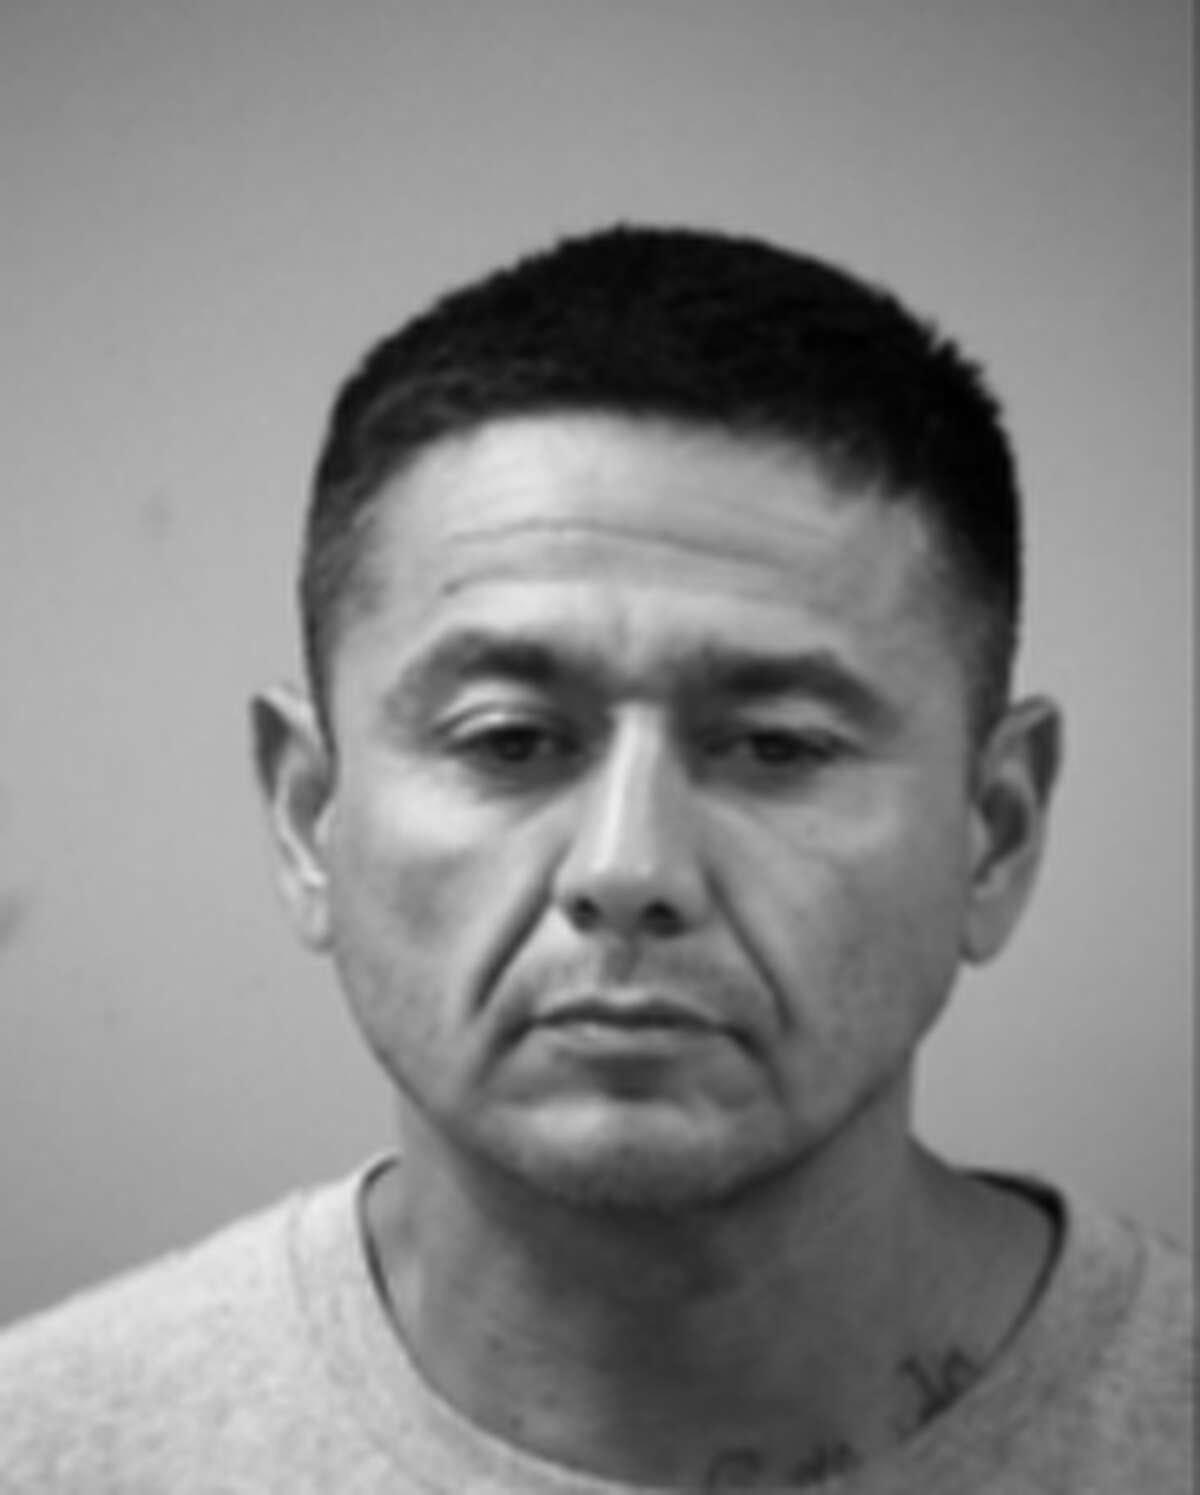 Ramon "Mon" Mendoza San Antonio, Texas Wanted for engaging in organized criminal activity and theft